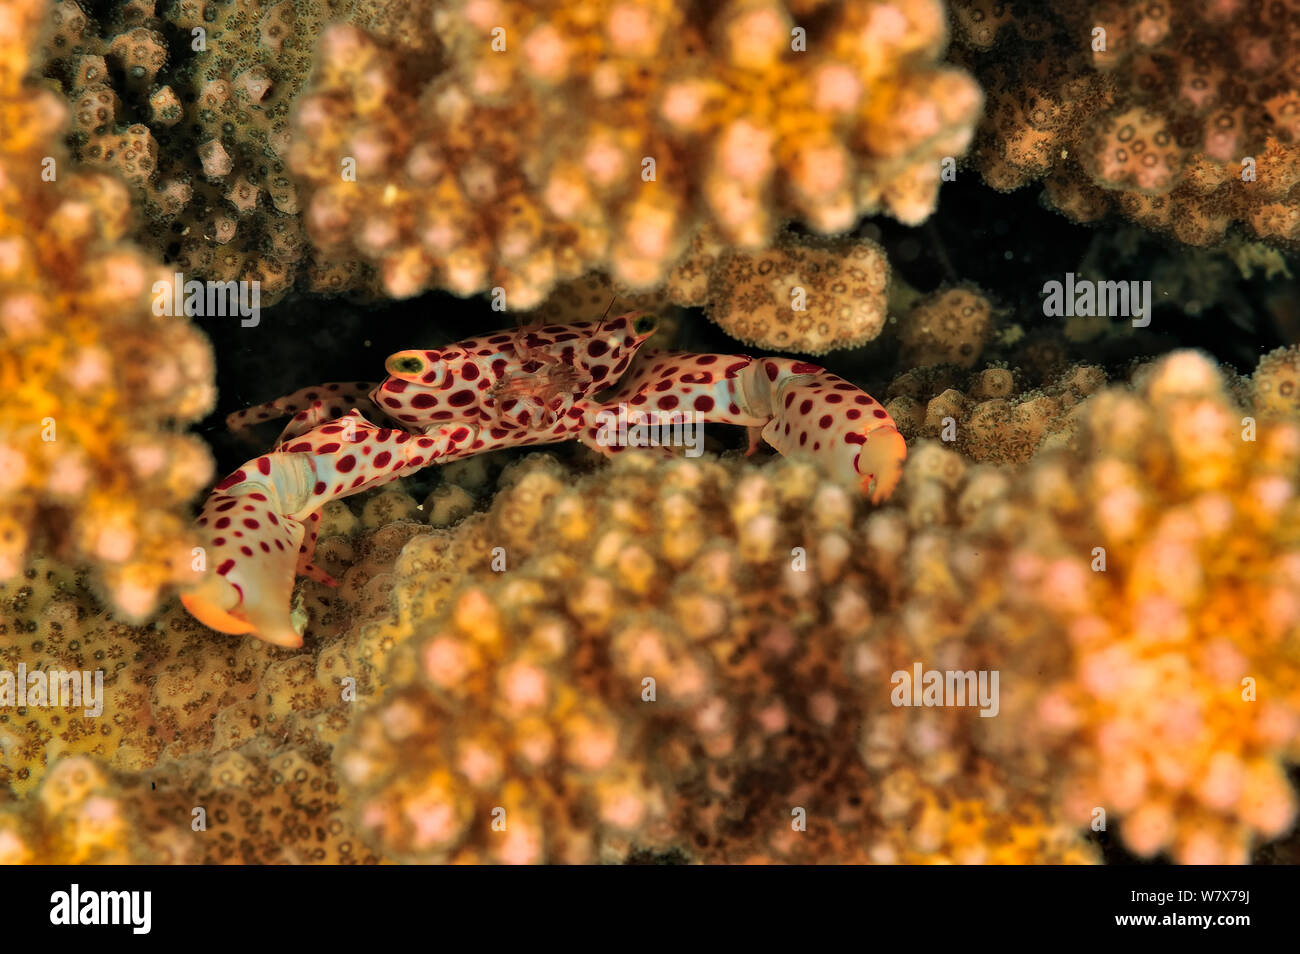 Red spotted coral crab (Trapezia rufopunctata) hidden in a hard coral (Pocillopora ) Madagascar. Indian Ocean. Stock Photo